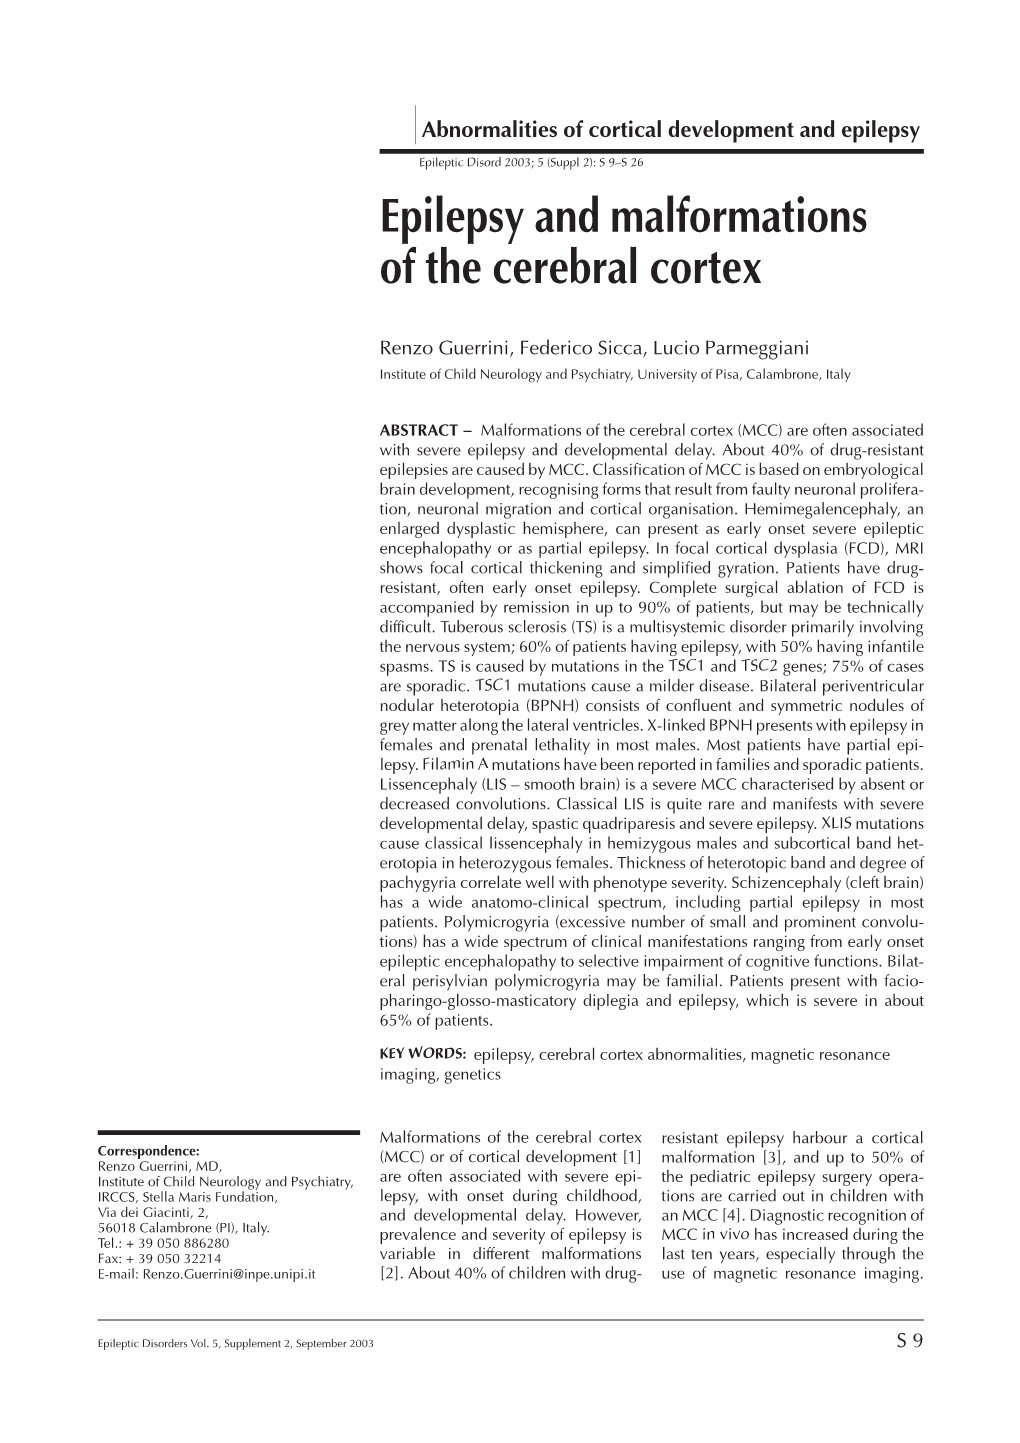 Epilepsy and Malformations of the Cerebral Cortex